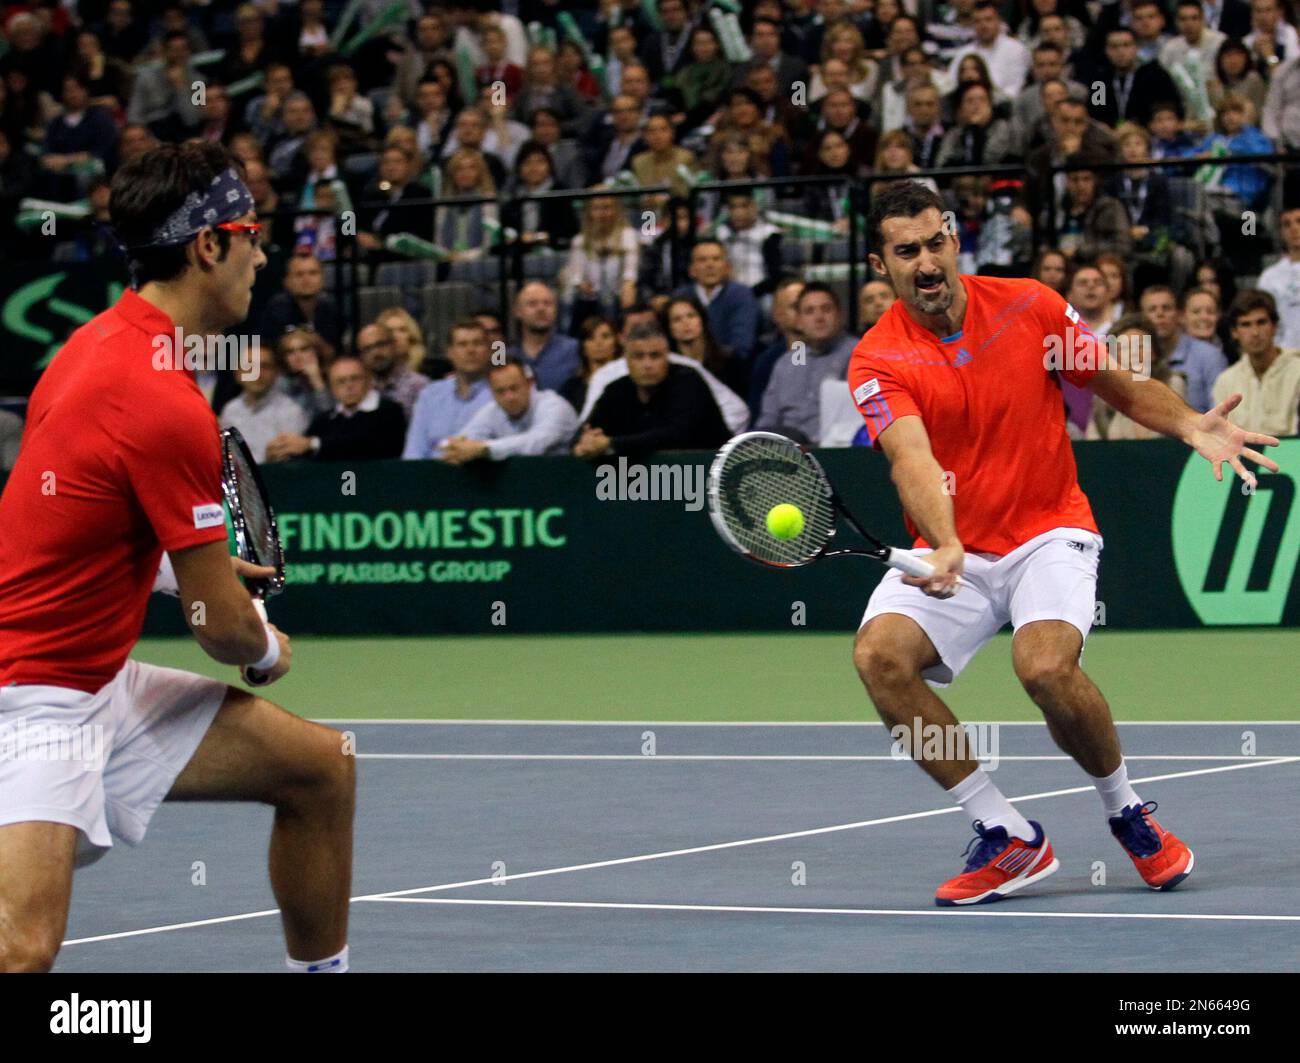 Serbia's Nenad Zimonjic, right, returns a ball as his partner Ilija  Bozoljac looks on during their Davis Cup finals doubles tennis match  against Tomas Berdych and Radek Stepanek of Czech Republic, in